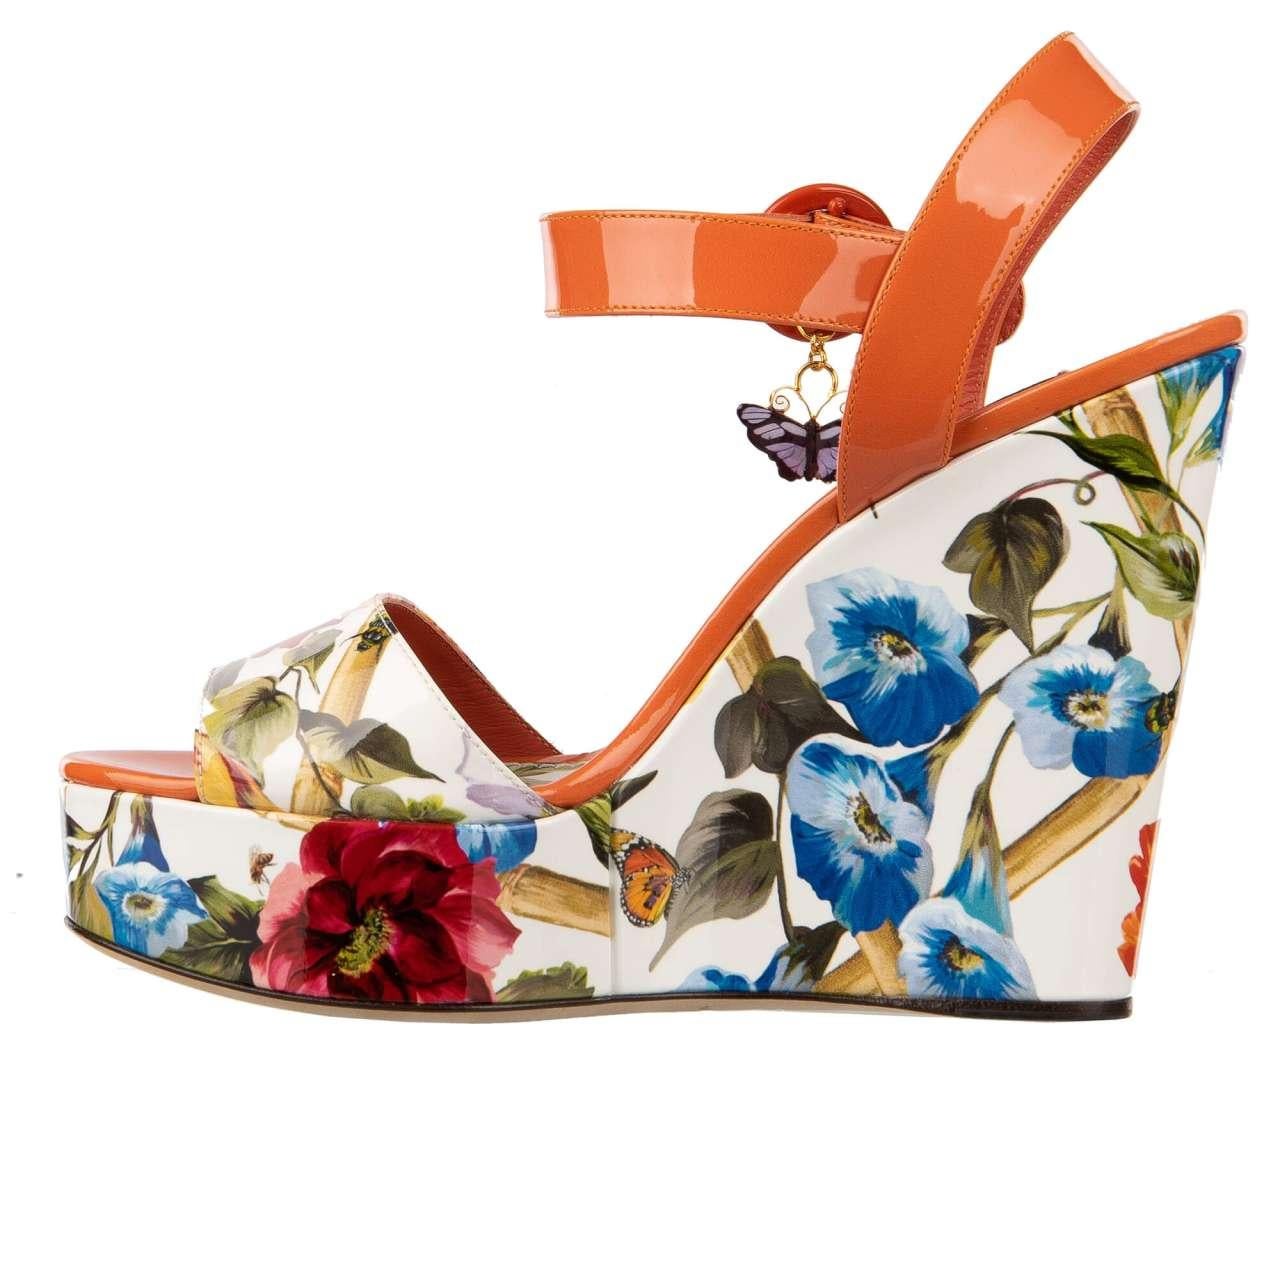 - Floral and lizard pattern printed patent leather platform sandals BIANCA with butterfly pendant in orange and white by DOLCE & GABBANA - MADE IN ITALY - RUNWAY - Dolce & Gabbana Fashion Show - Former RRP: EUR 995 - New with Box - Model: